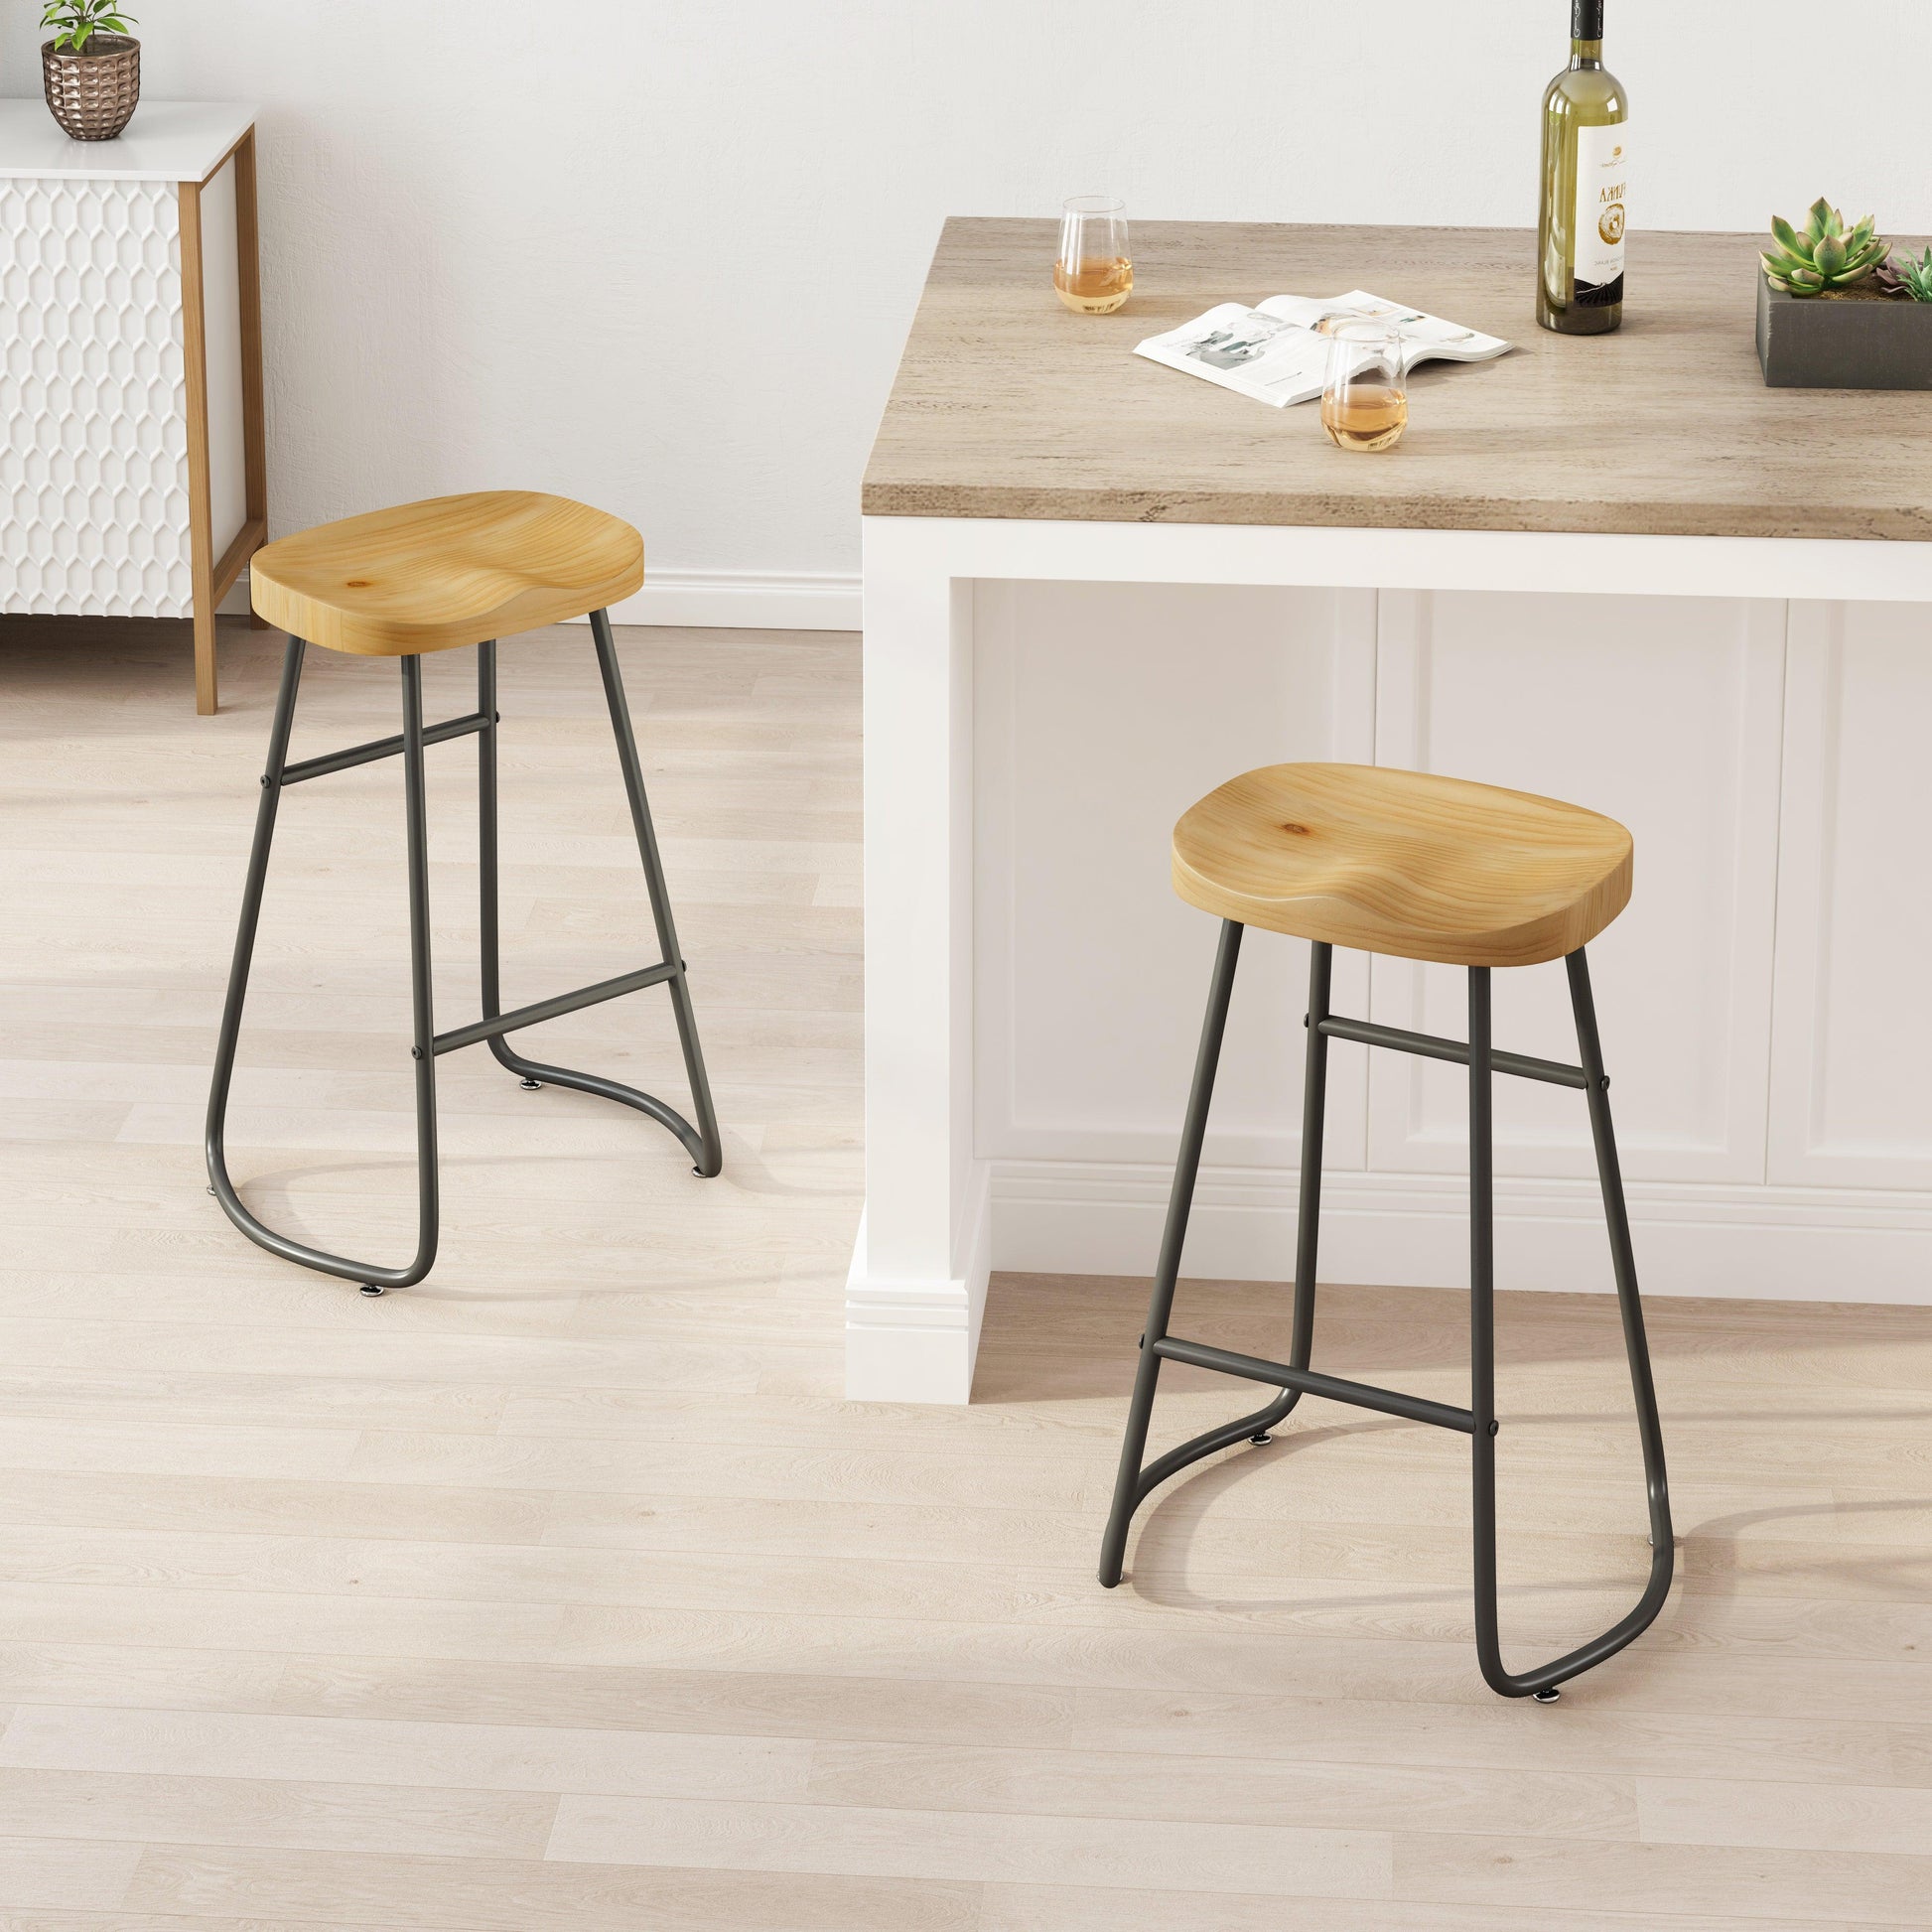 29.52" Stylish and Minimalist Bar Stools Set of 2 Counter Height Bar Stools for Kitchen Island Wood Color - FurniFindUSA